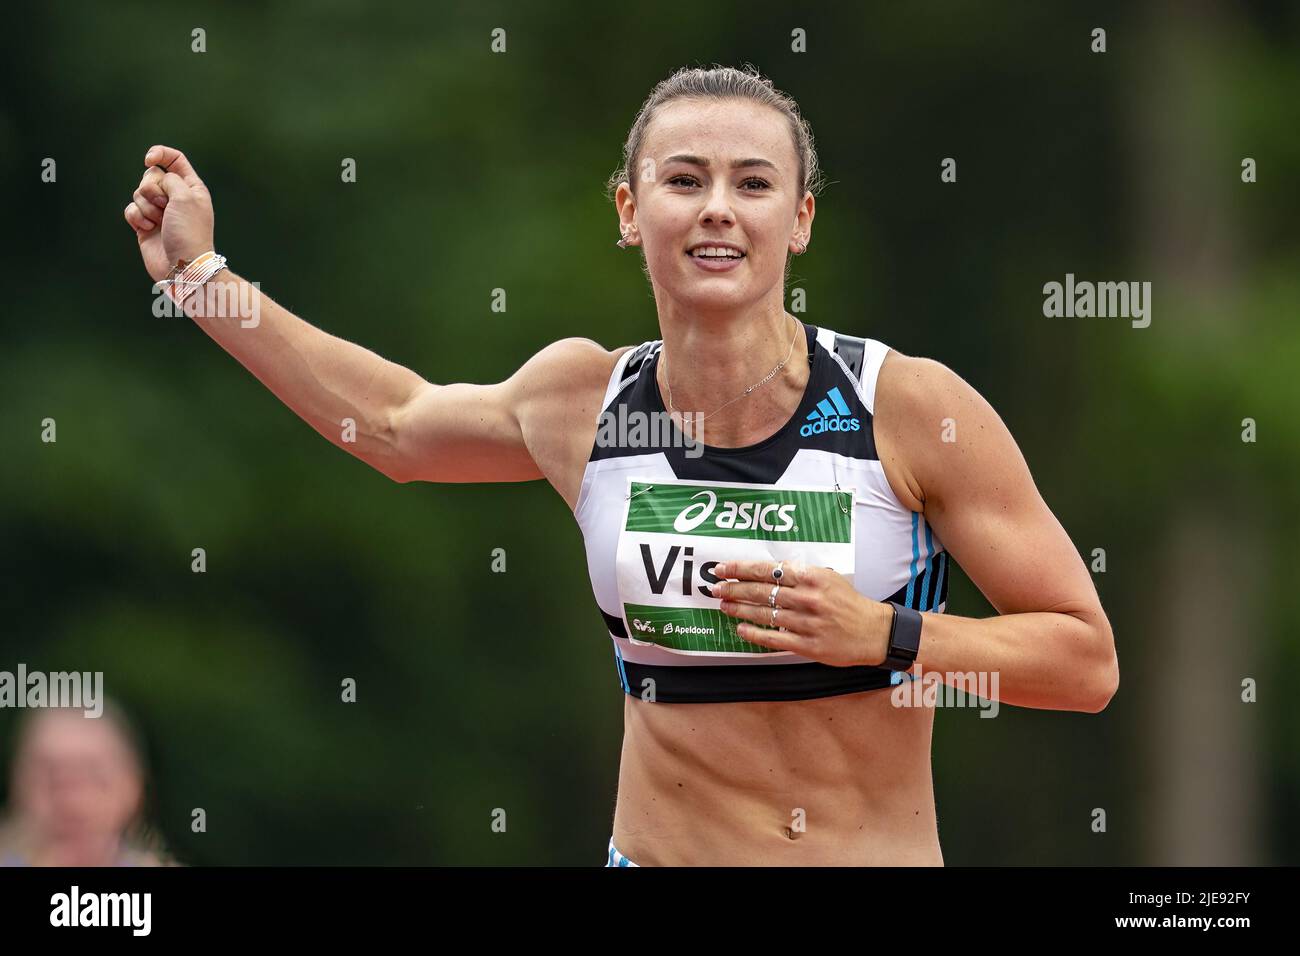 Enzovoorts Muf schijf 2022-06-26 13:29:19 APELDOORN - Athlete Nadine Visser during the 100 meter  hurdles section at the Dutch Athletics Championships. ANP RONALD  HOOGENDOORN netherlands out - belgium out Stock Photo - Alamy